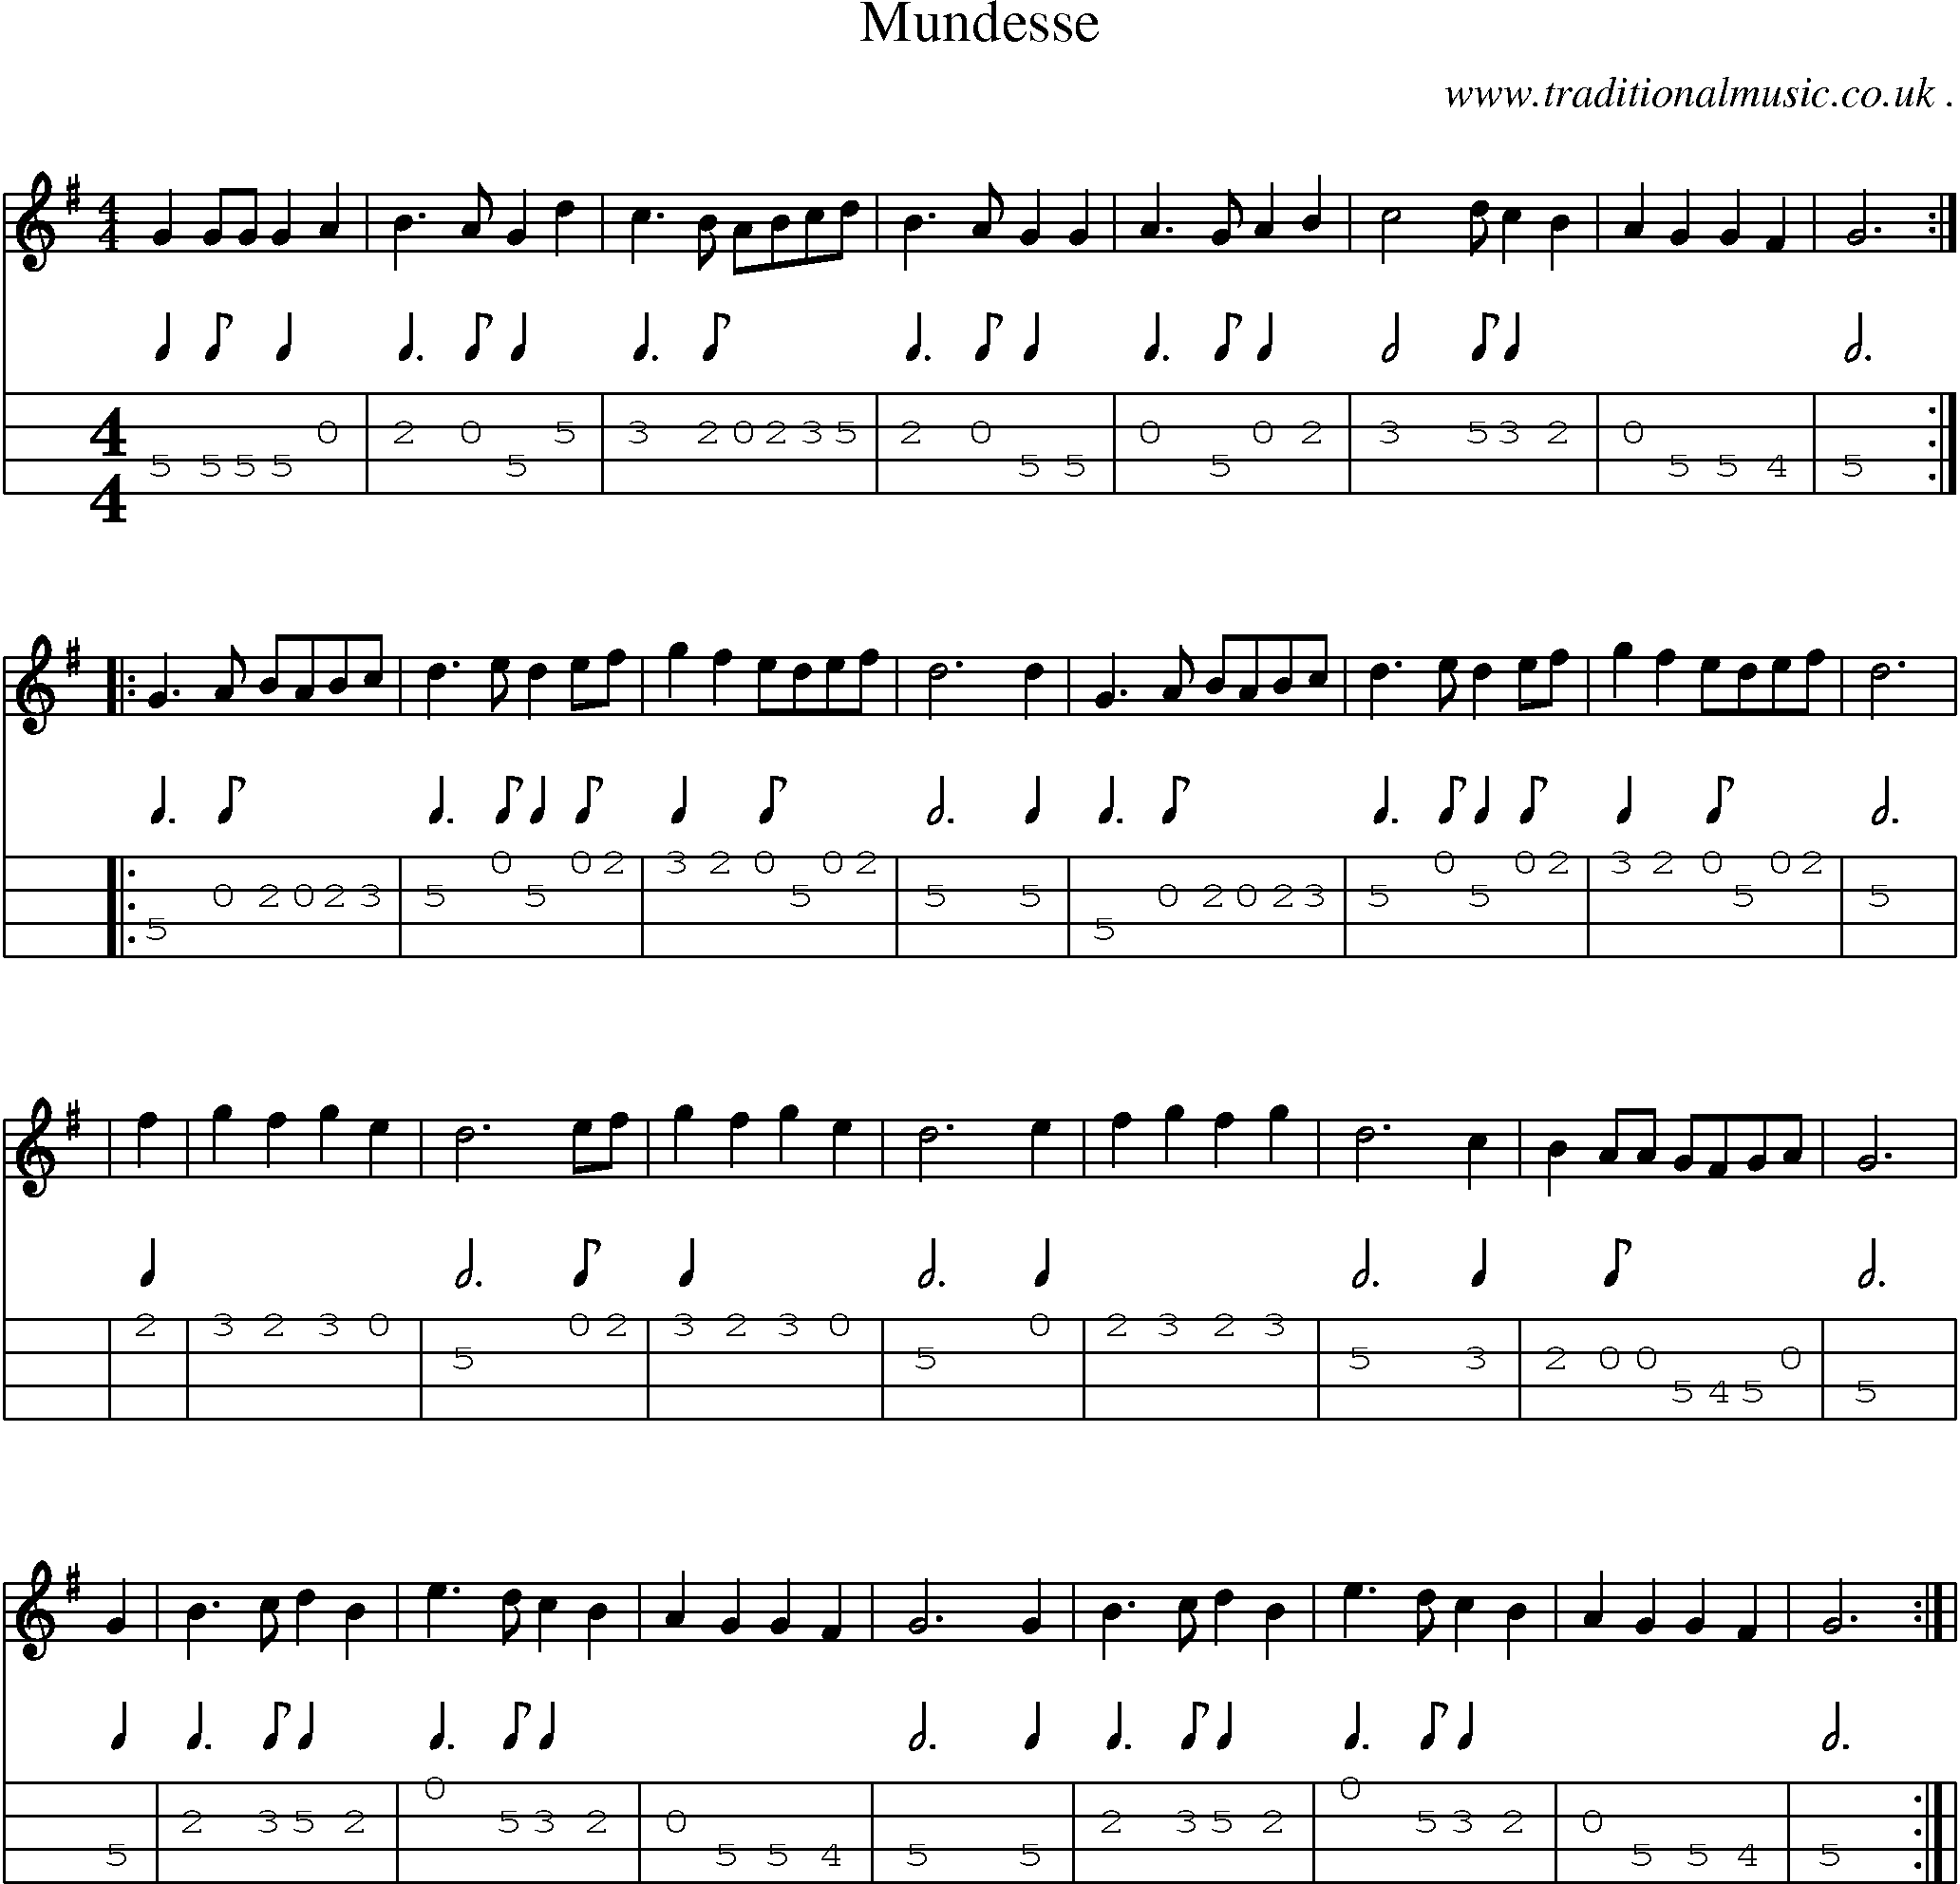 Sheet-Music and Mandolin Tabs for Mundesse